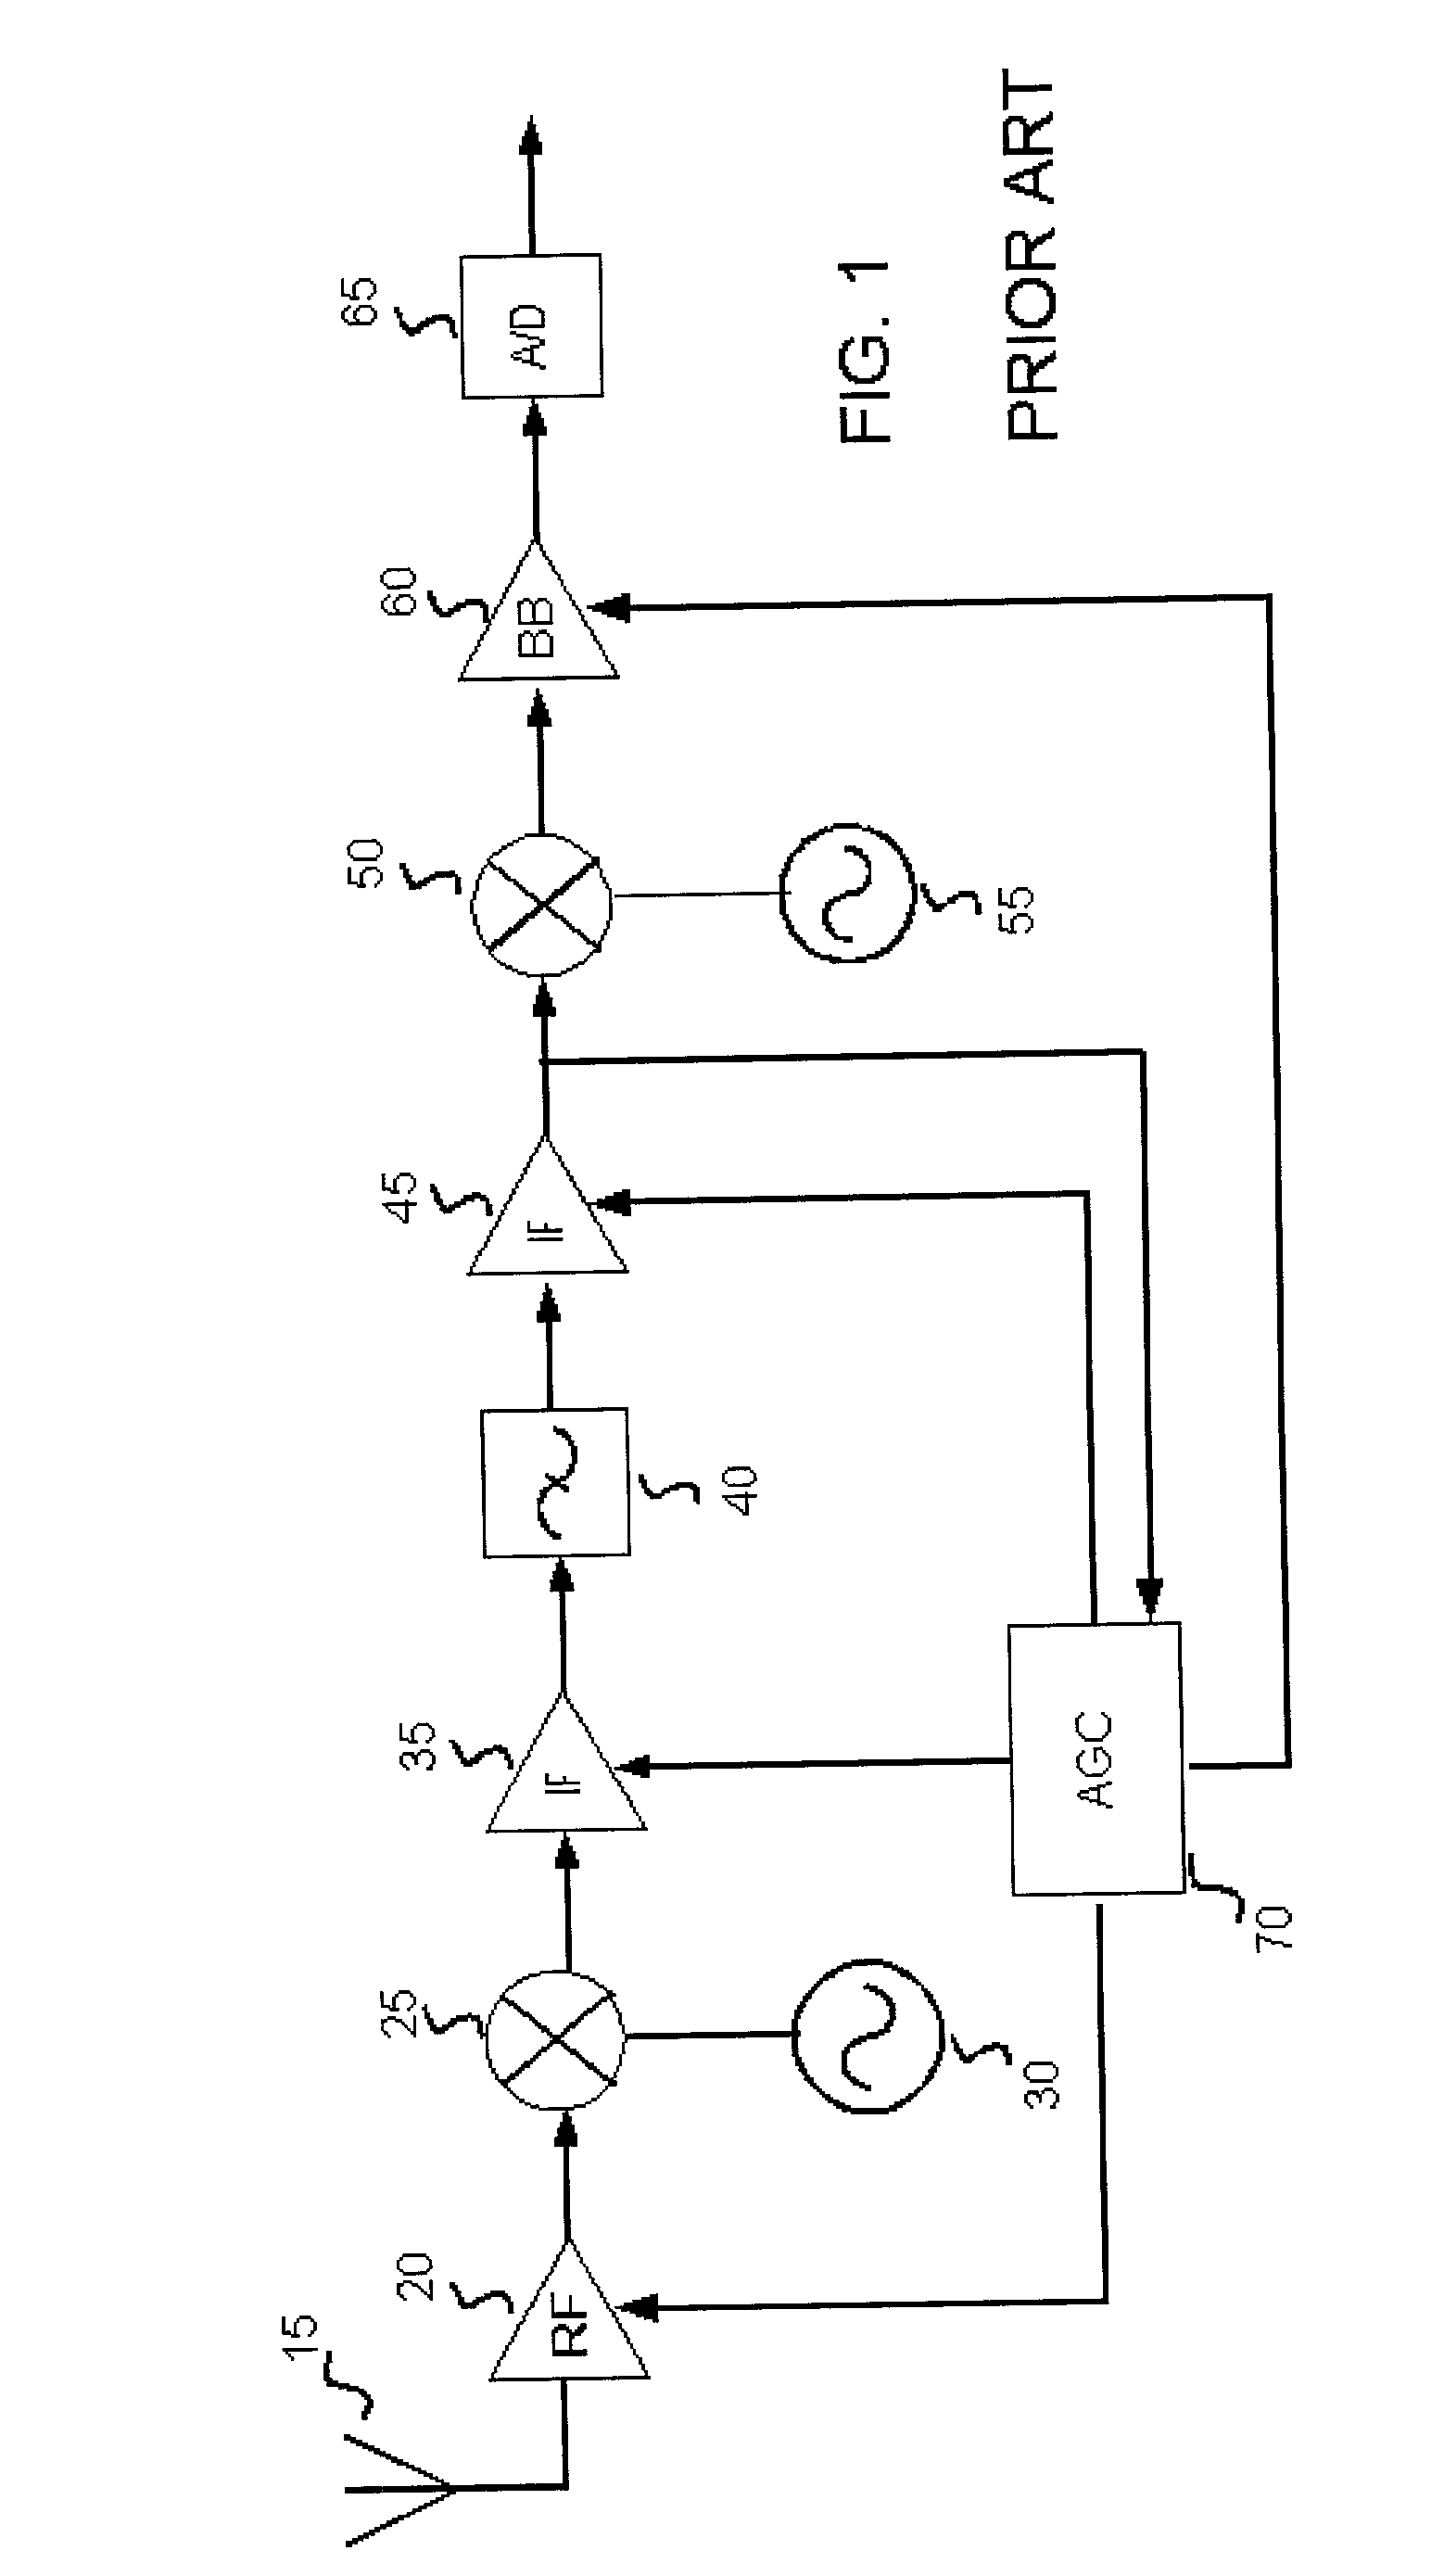 In-band and out-of-band signal detection for automatic gain calibration systems